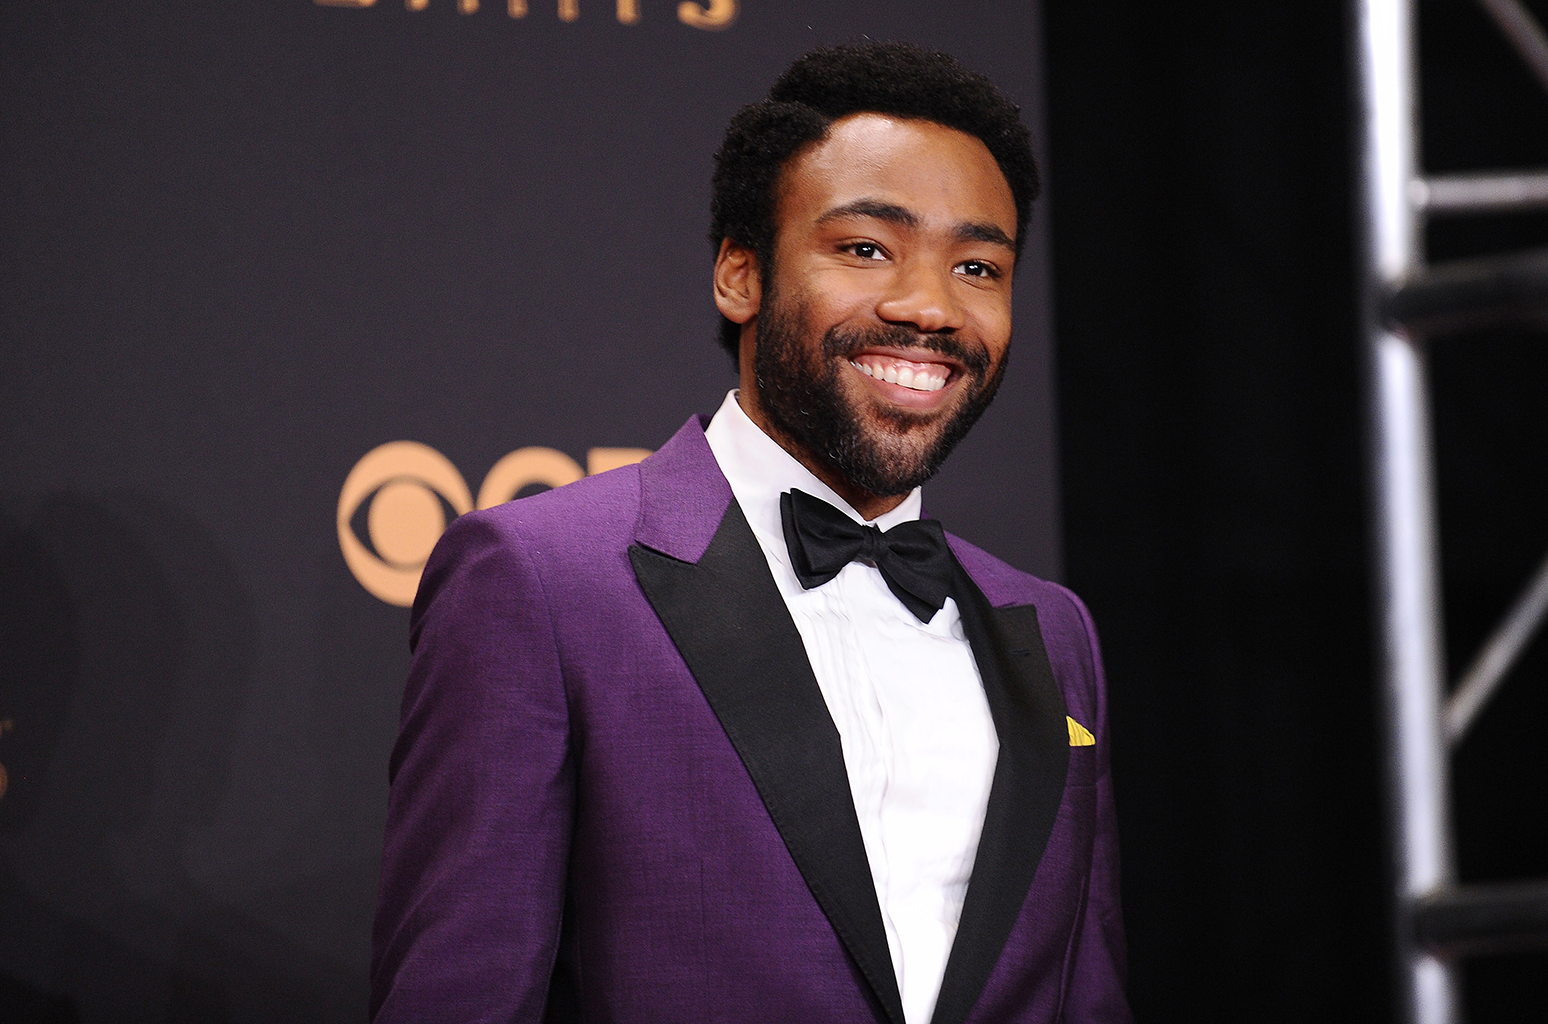 Donald Glover Set to Host 'SNL,' With Musical Guest Childish Gambino